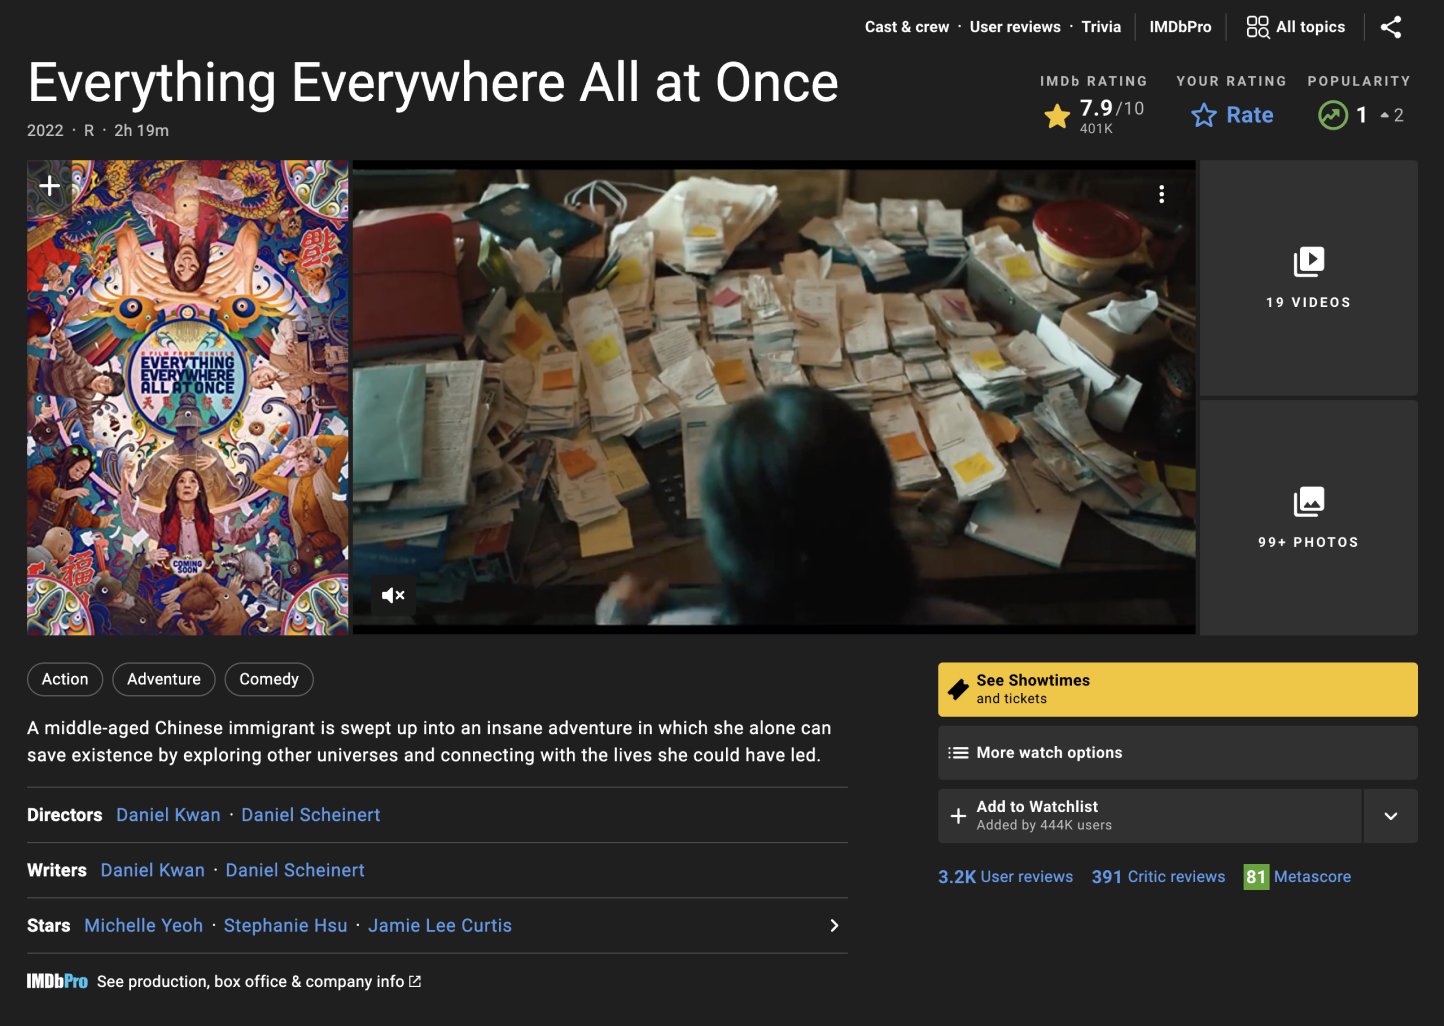 IMDb Web Title Subpages Redesign